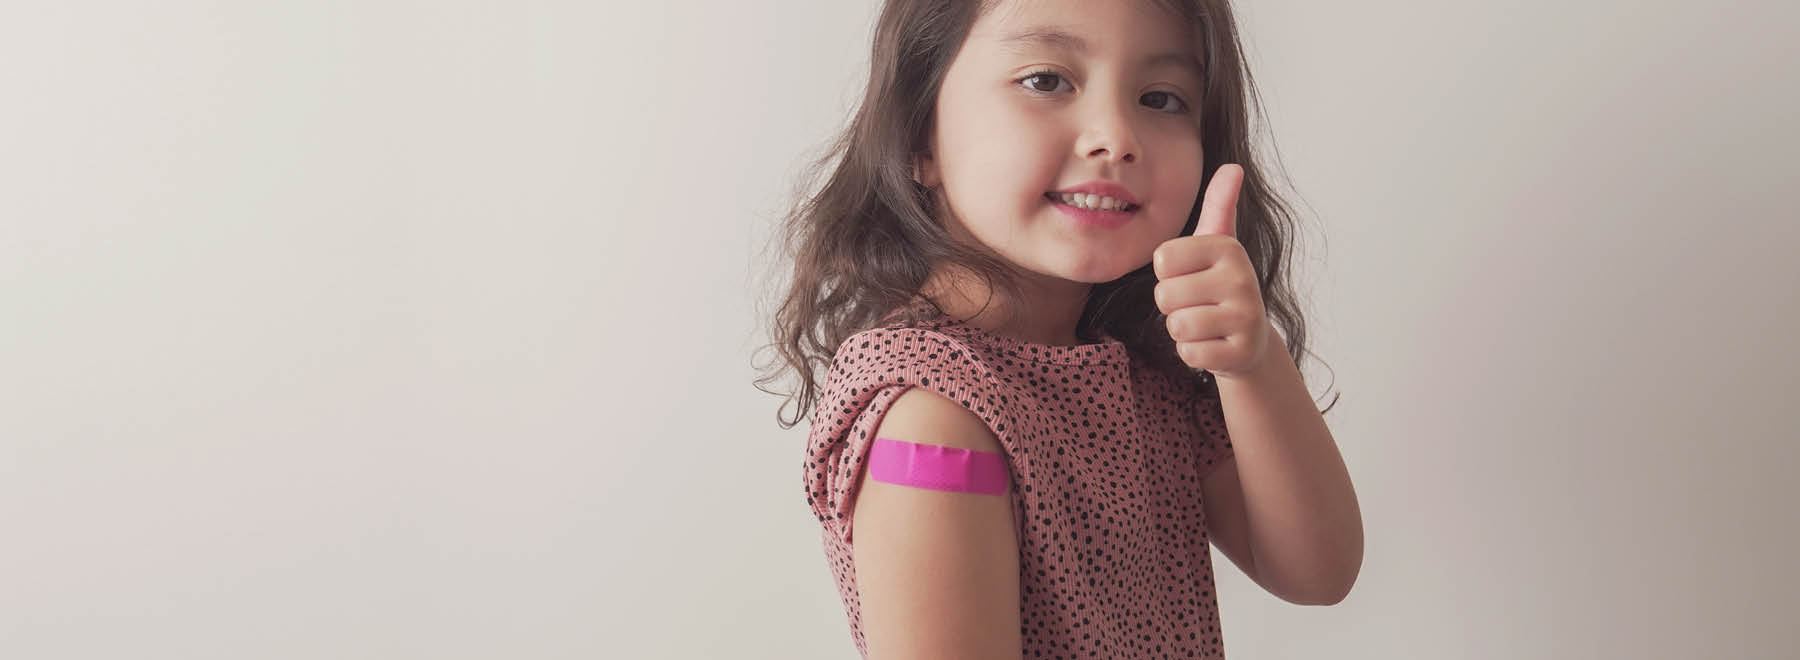 A young girl with a bandage on her upper arms gives a thumbs-up.